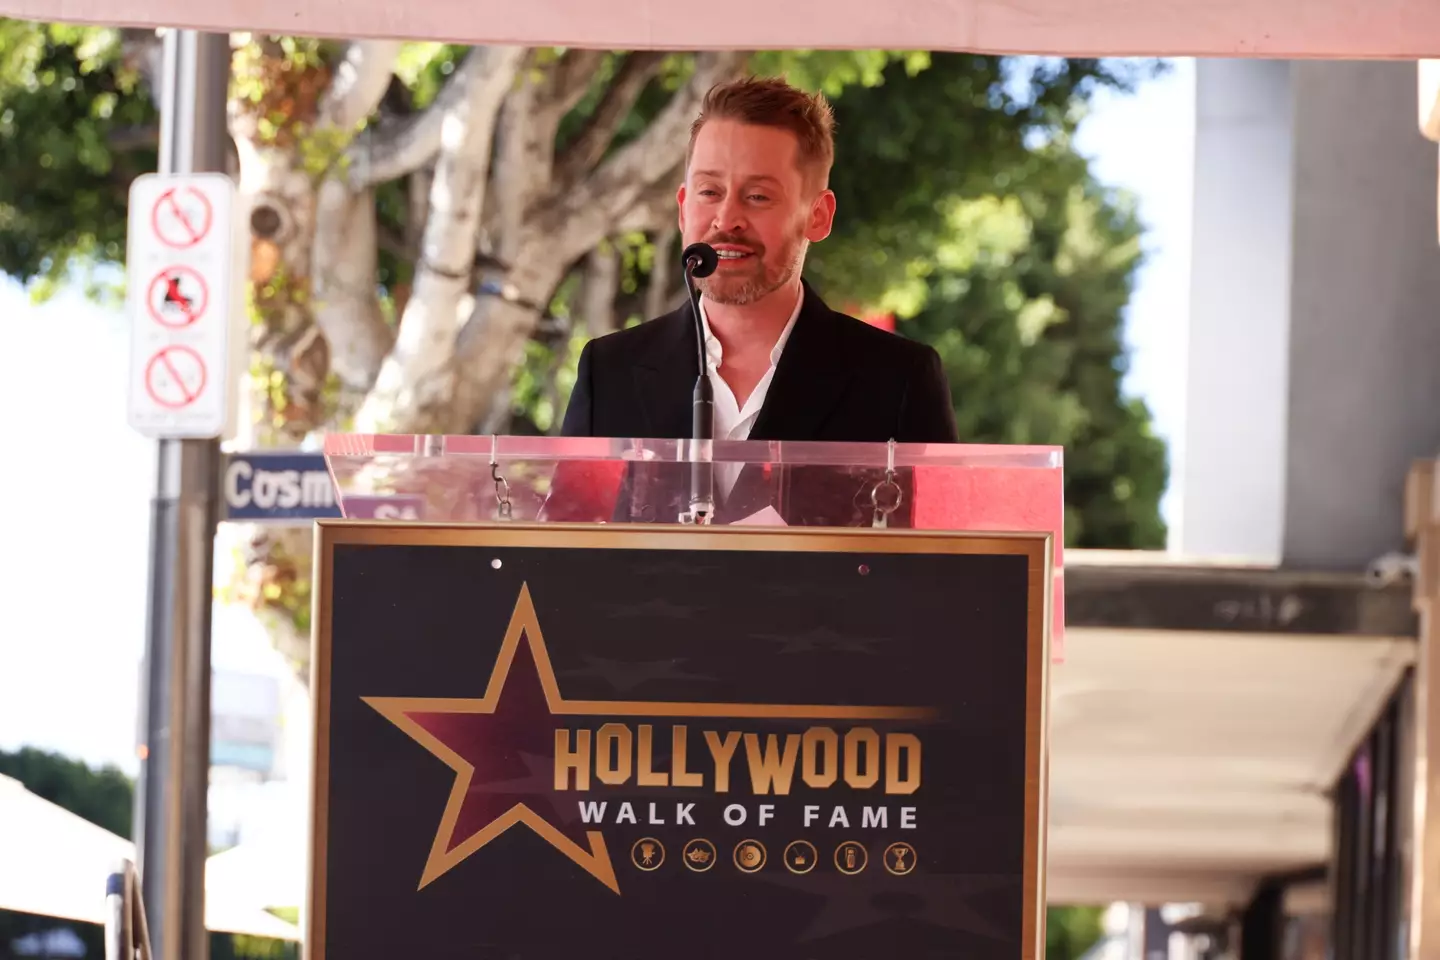 Macaulay Culkin made the sweetest remarks about his fiancée during his speech.